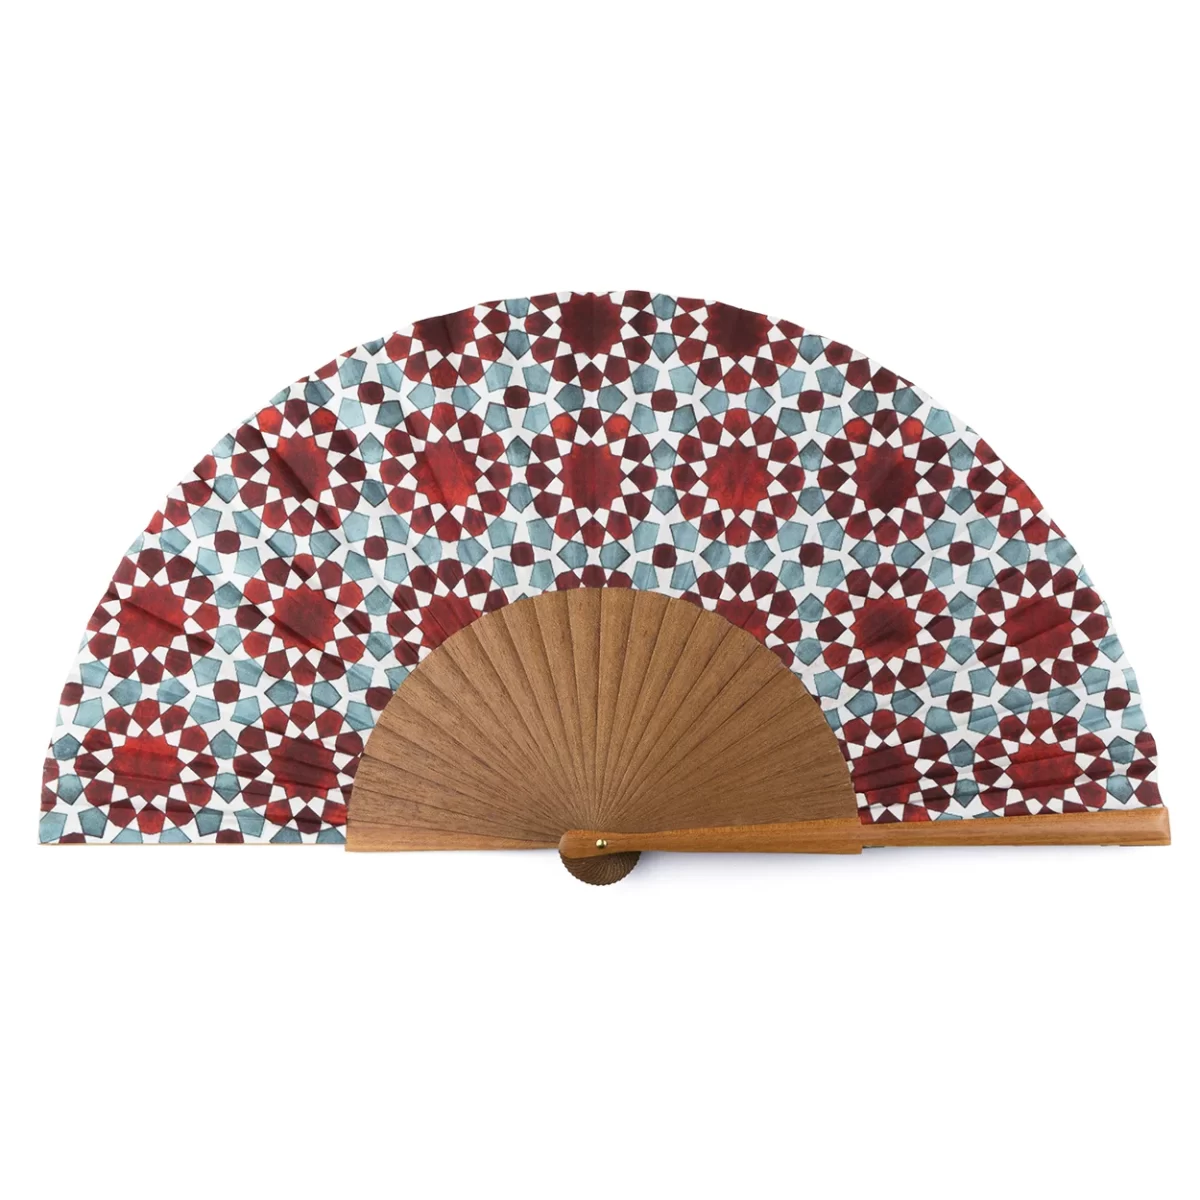 Blue and Red Silk Fan with Print Inspired by the Islamic Geometry of Al-Andalus.